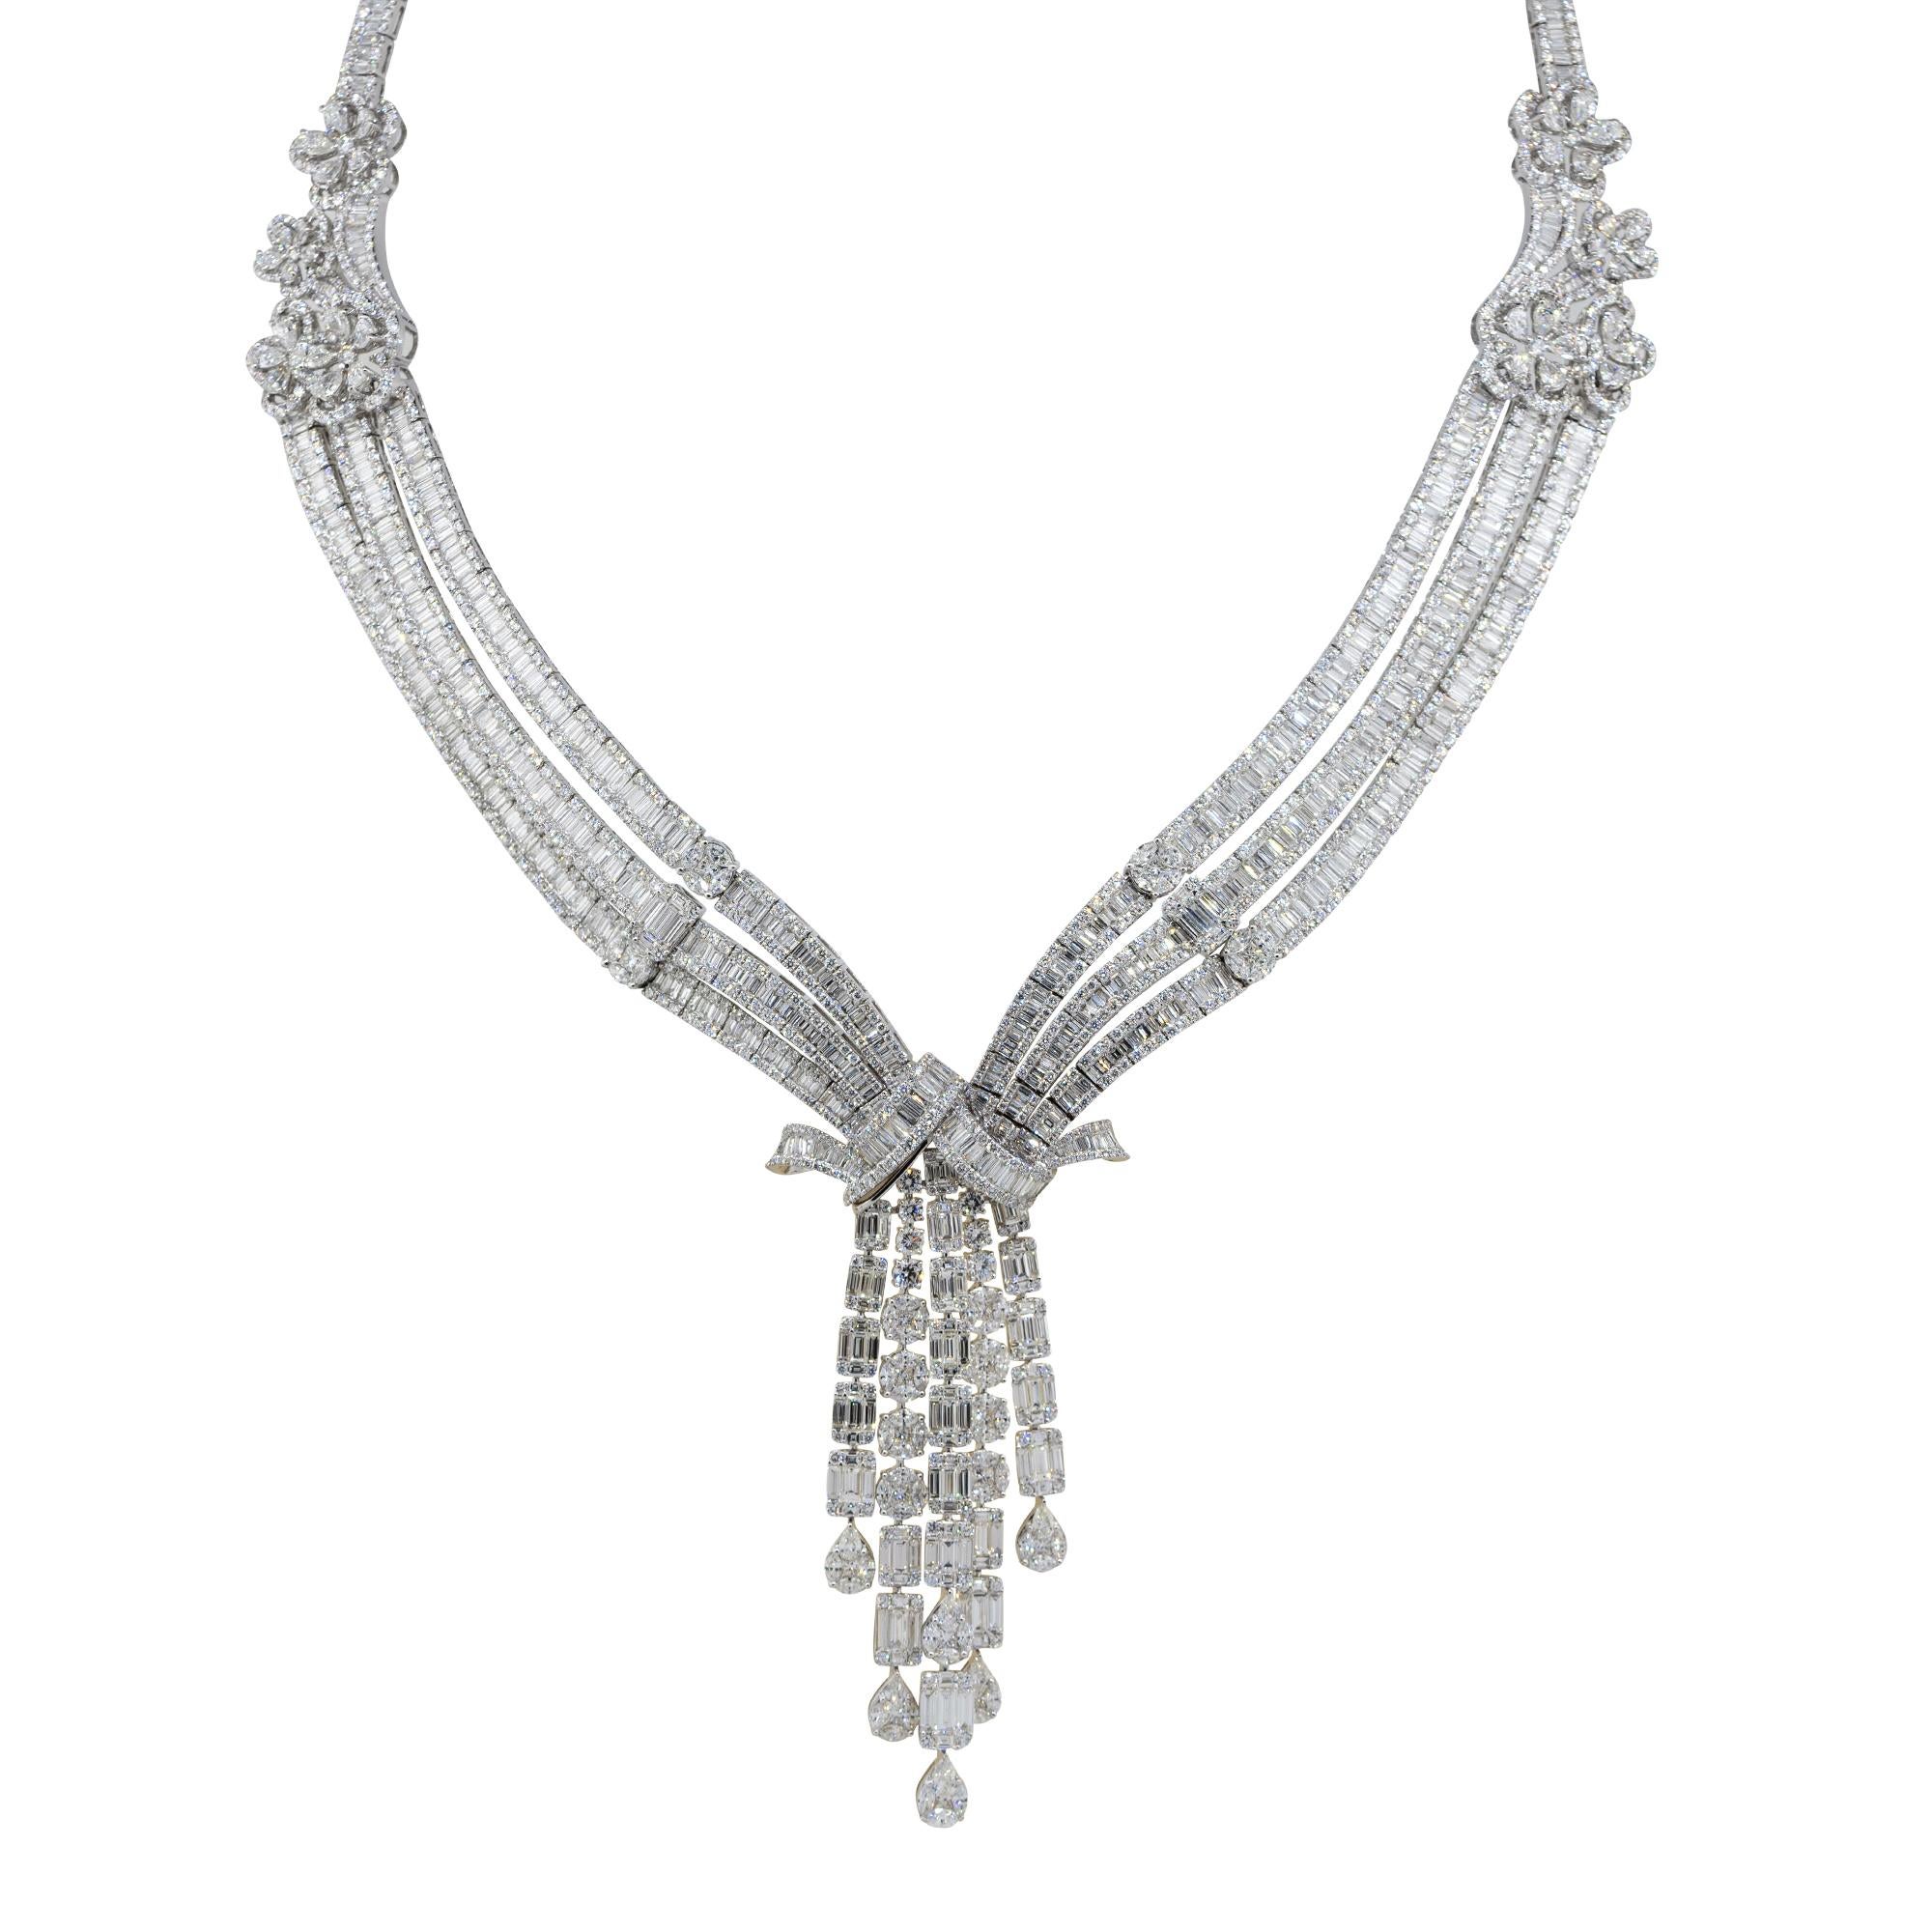 Material: 18k white gold
Diamond Details: Approx. 16.02ctw of round cut, 22.24ctw of Marquise cut and 5.05ctw of pear shaped Diamonds. Diamonds are G/H in color and VS in clarity
Necklace measurements: 17